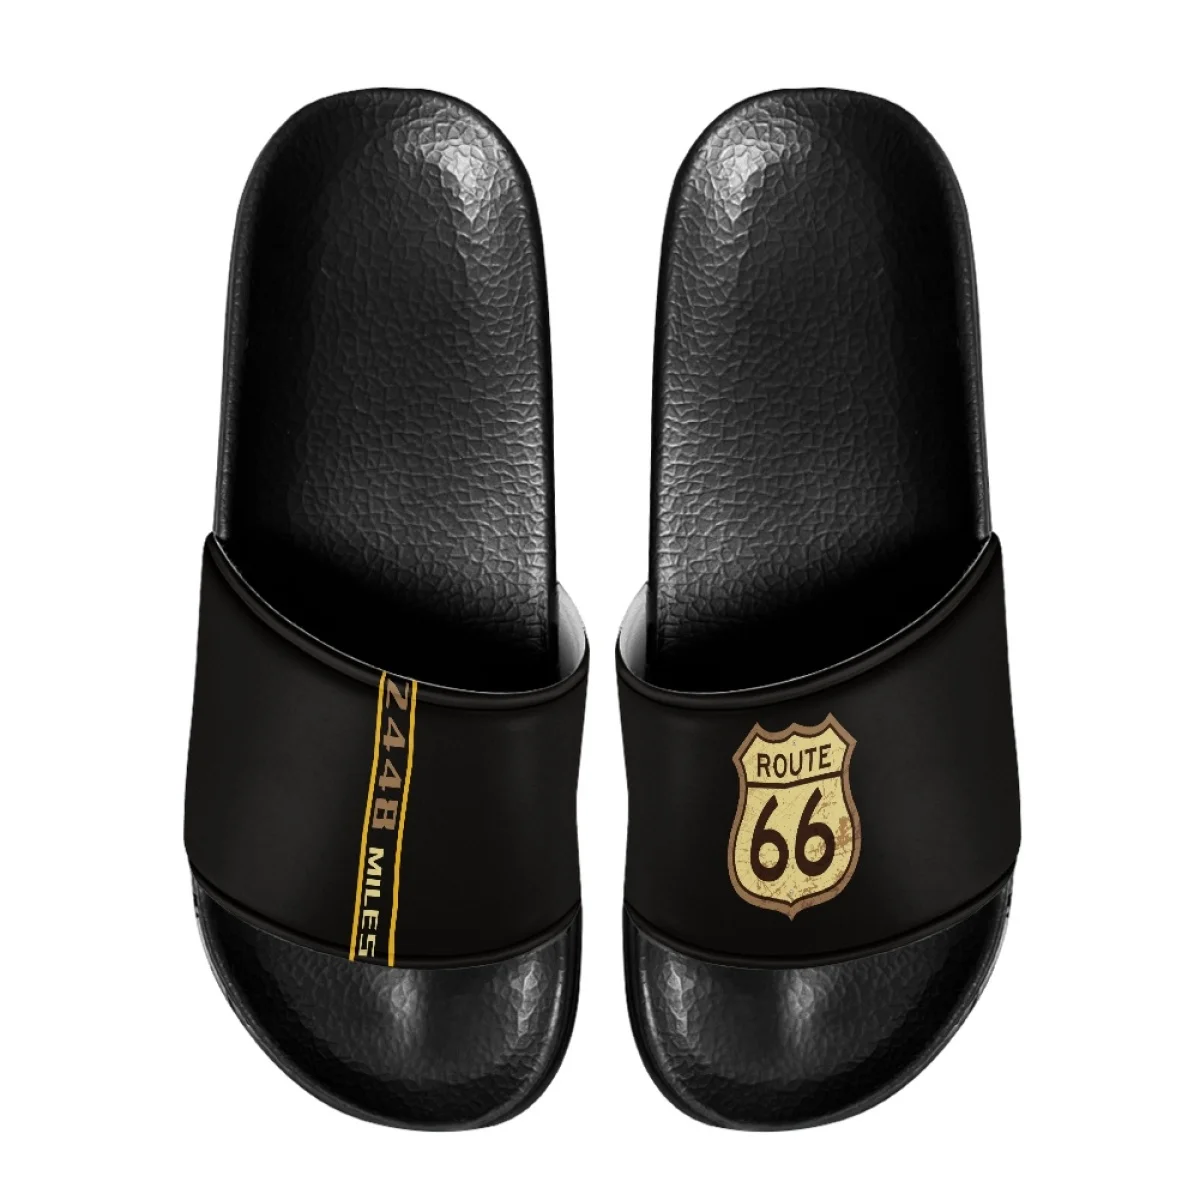 

Nopersonality US Route 66 Design Slippers Home Adult Sandals Cozy Flat Slides Fashion Summer Chinelos Outdoors Footwear